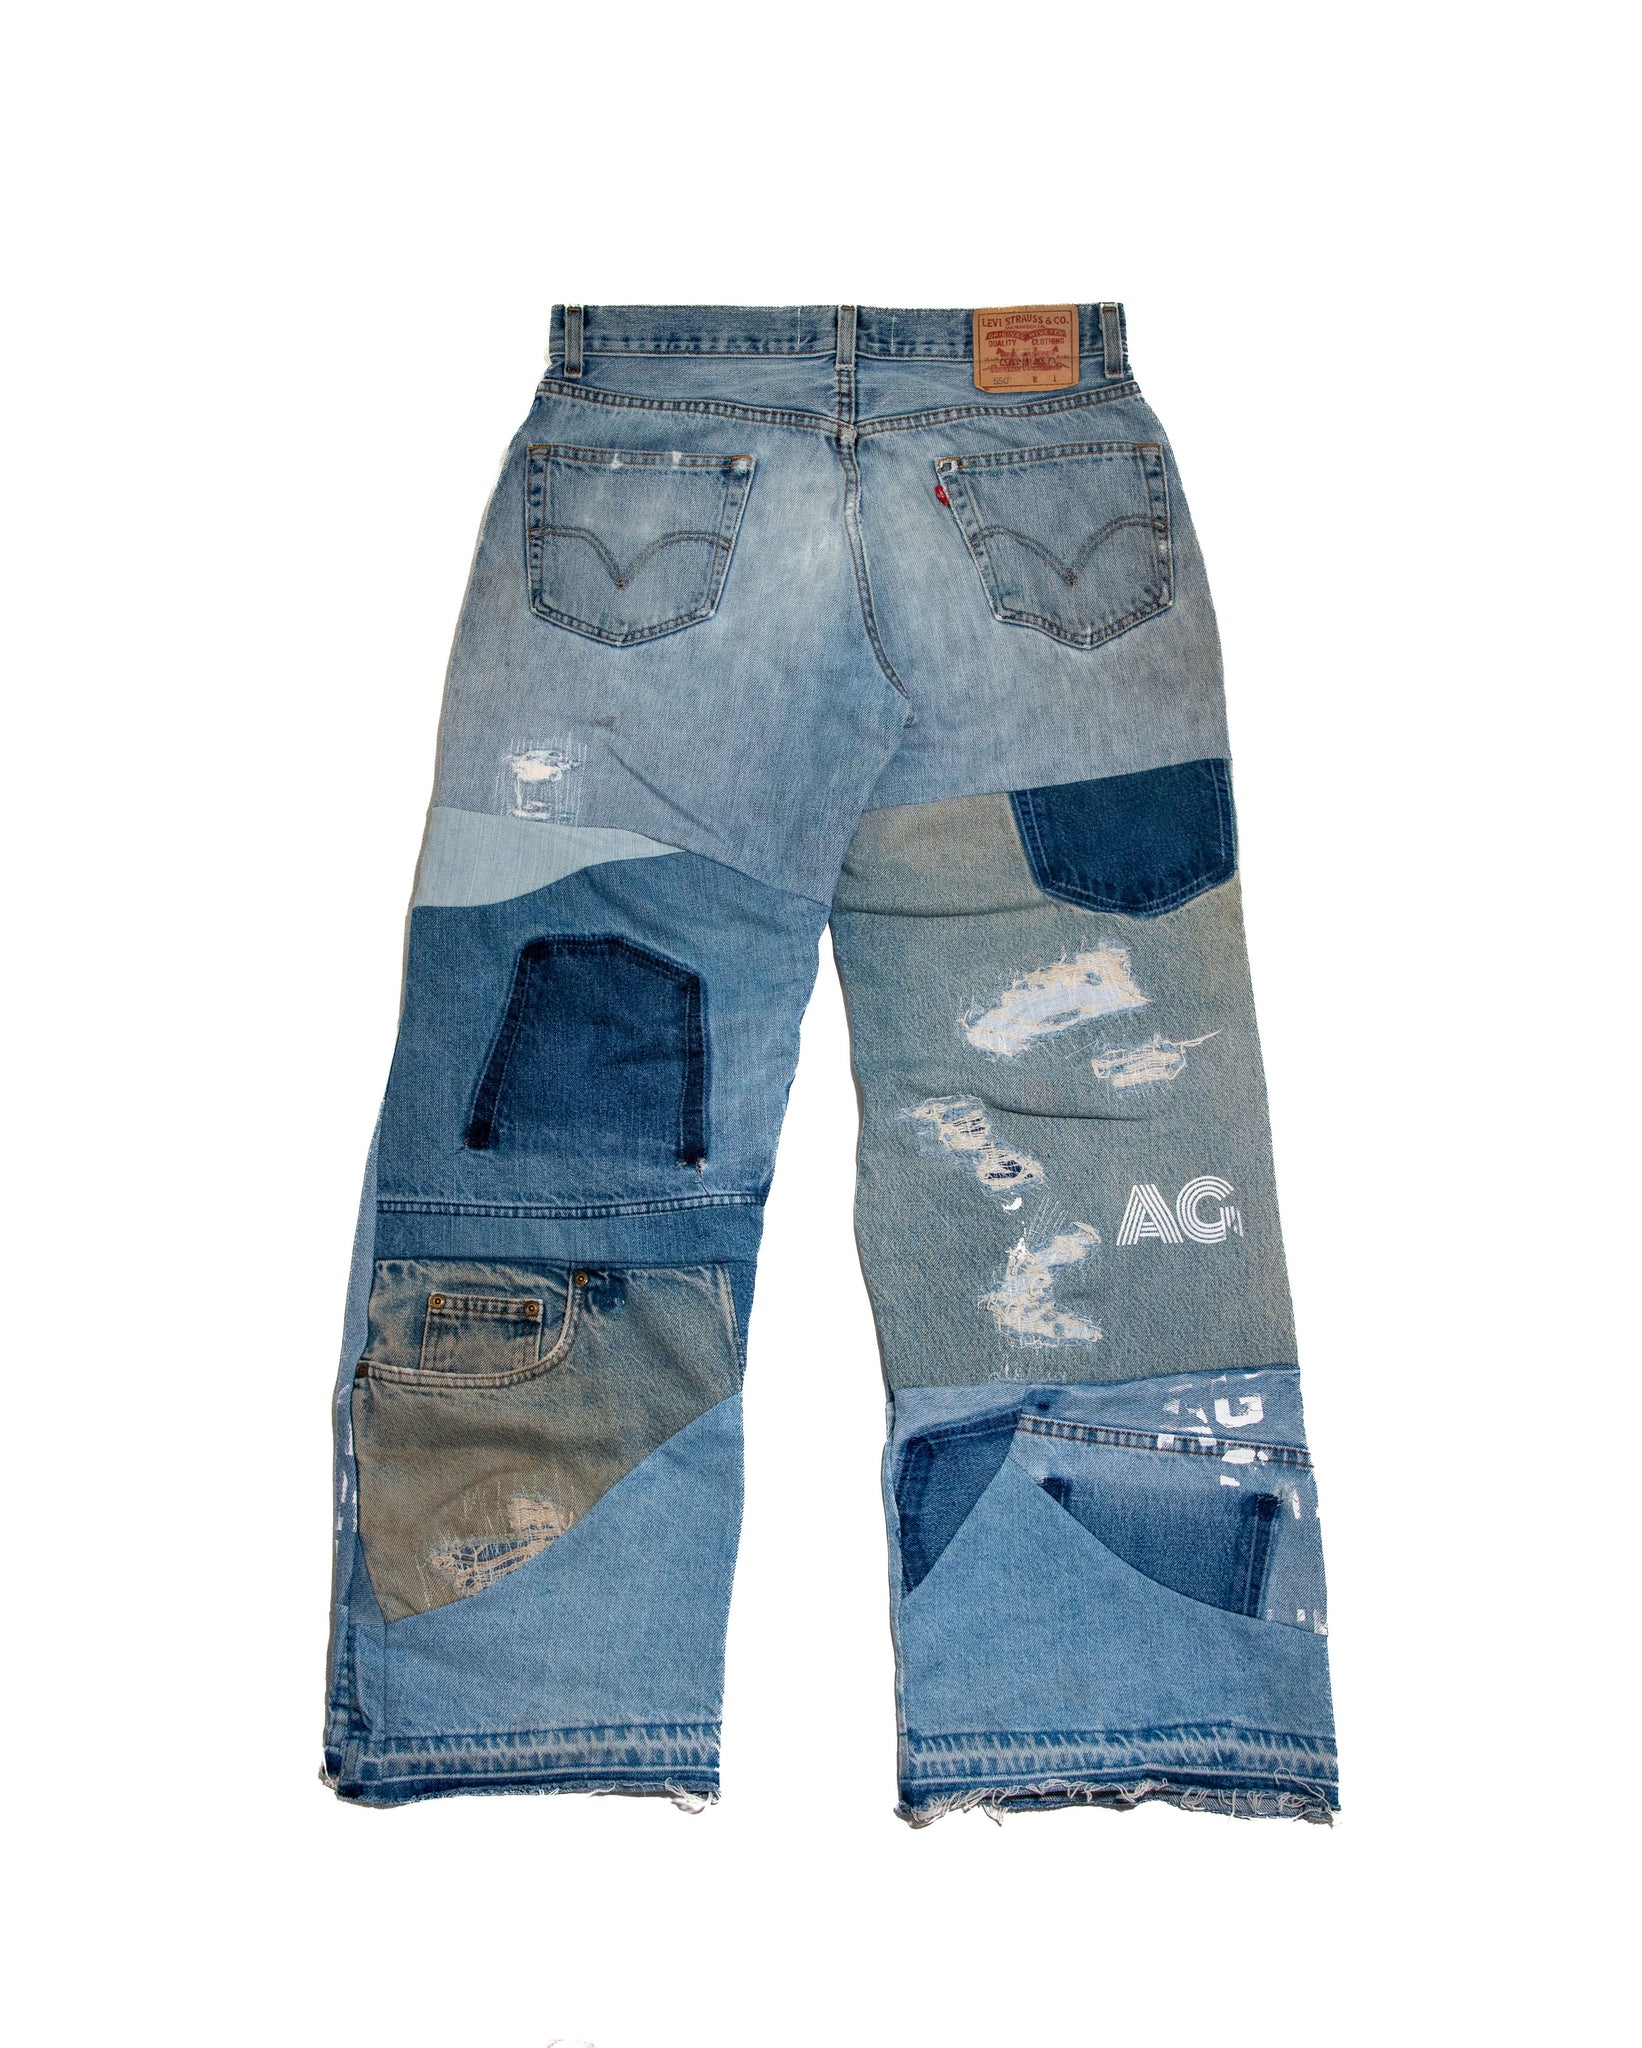 Vintage reconstructed jeans